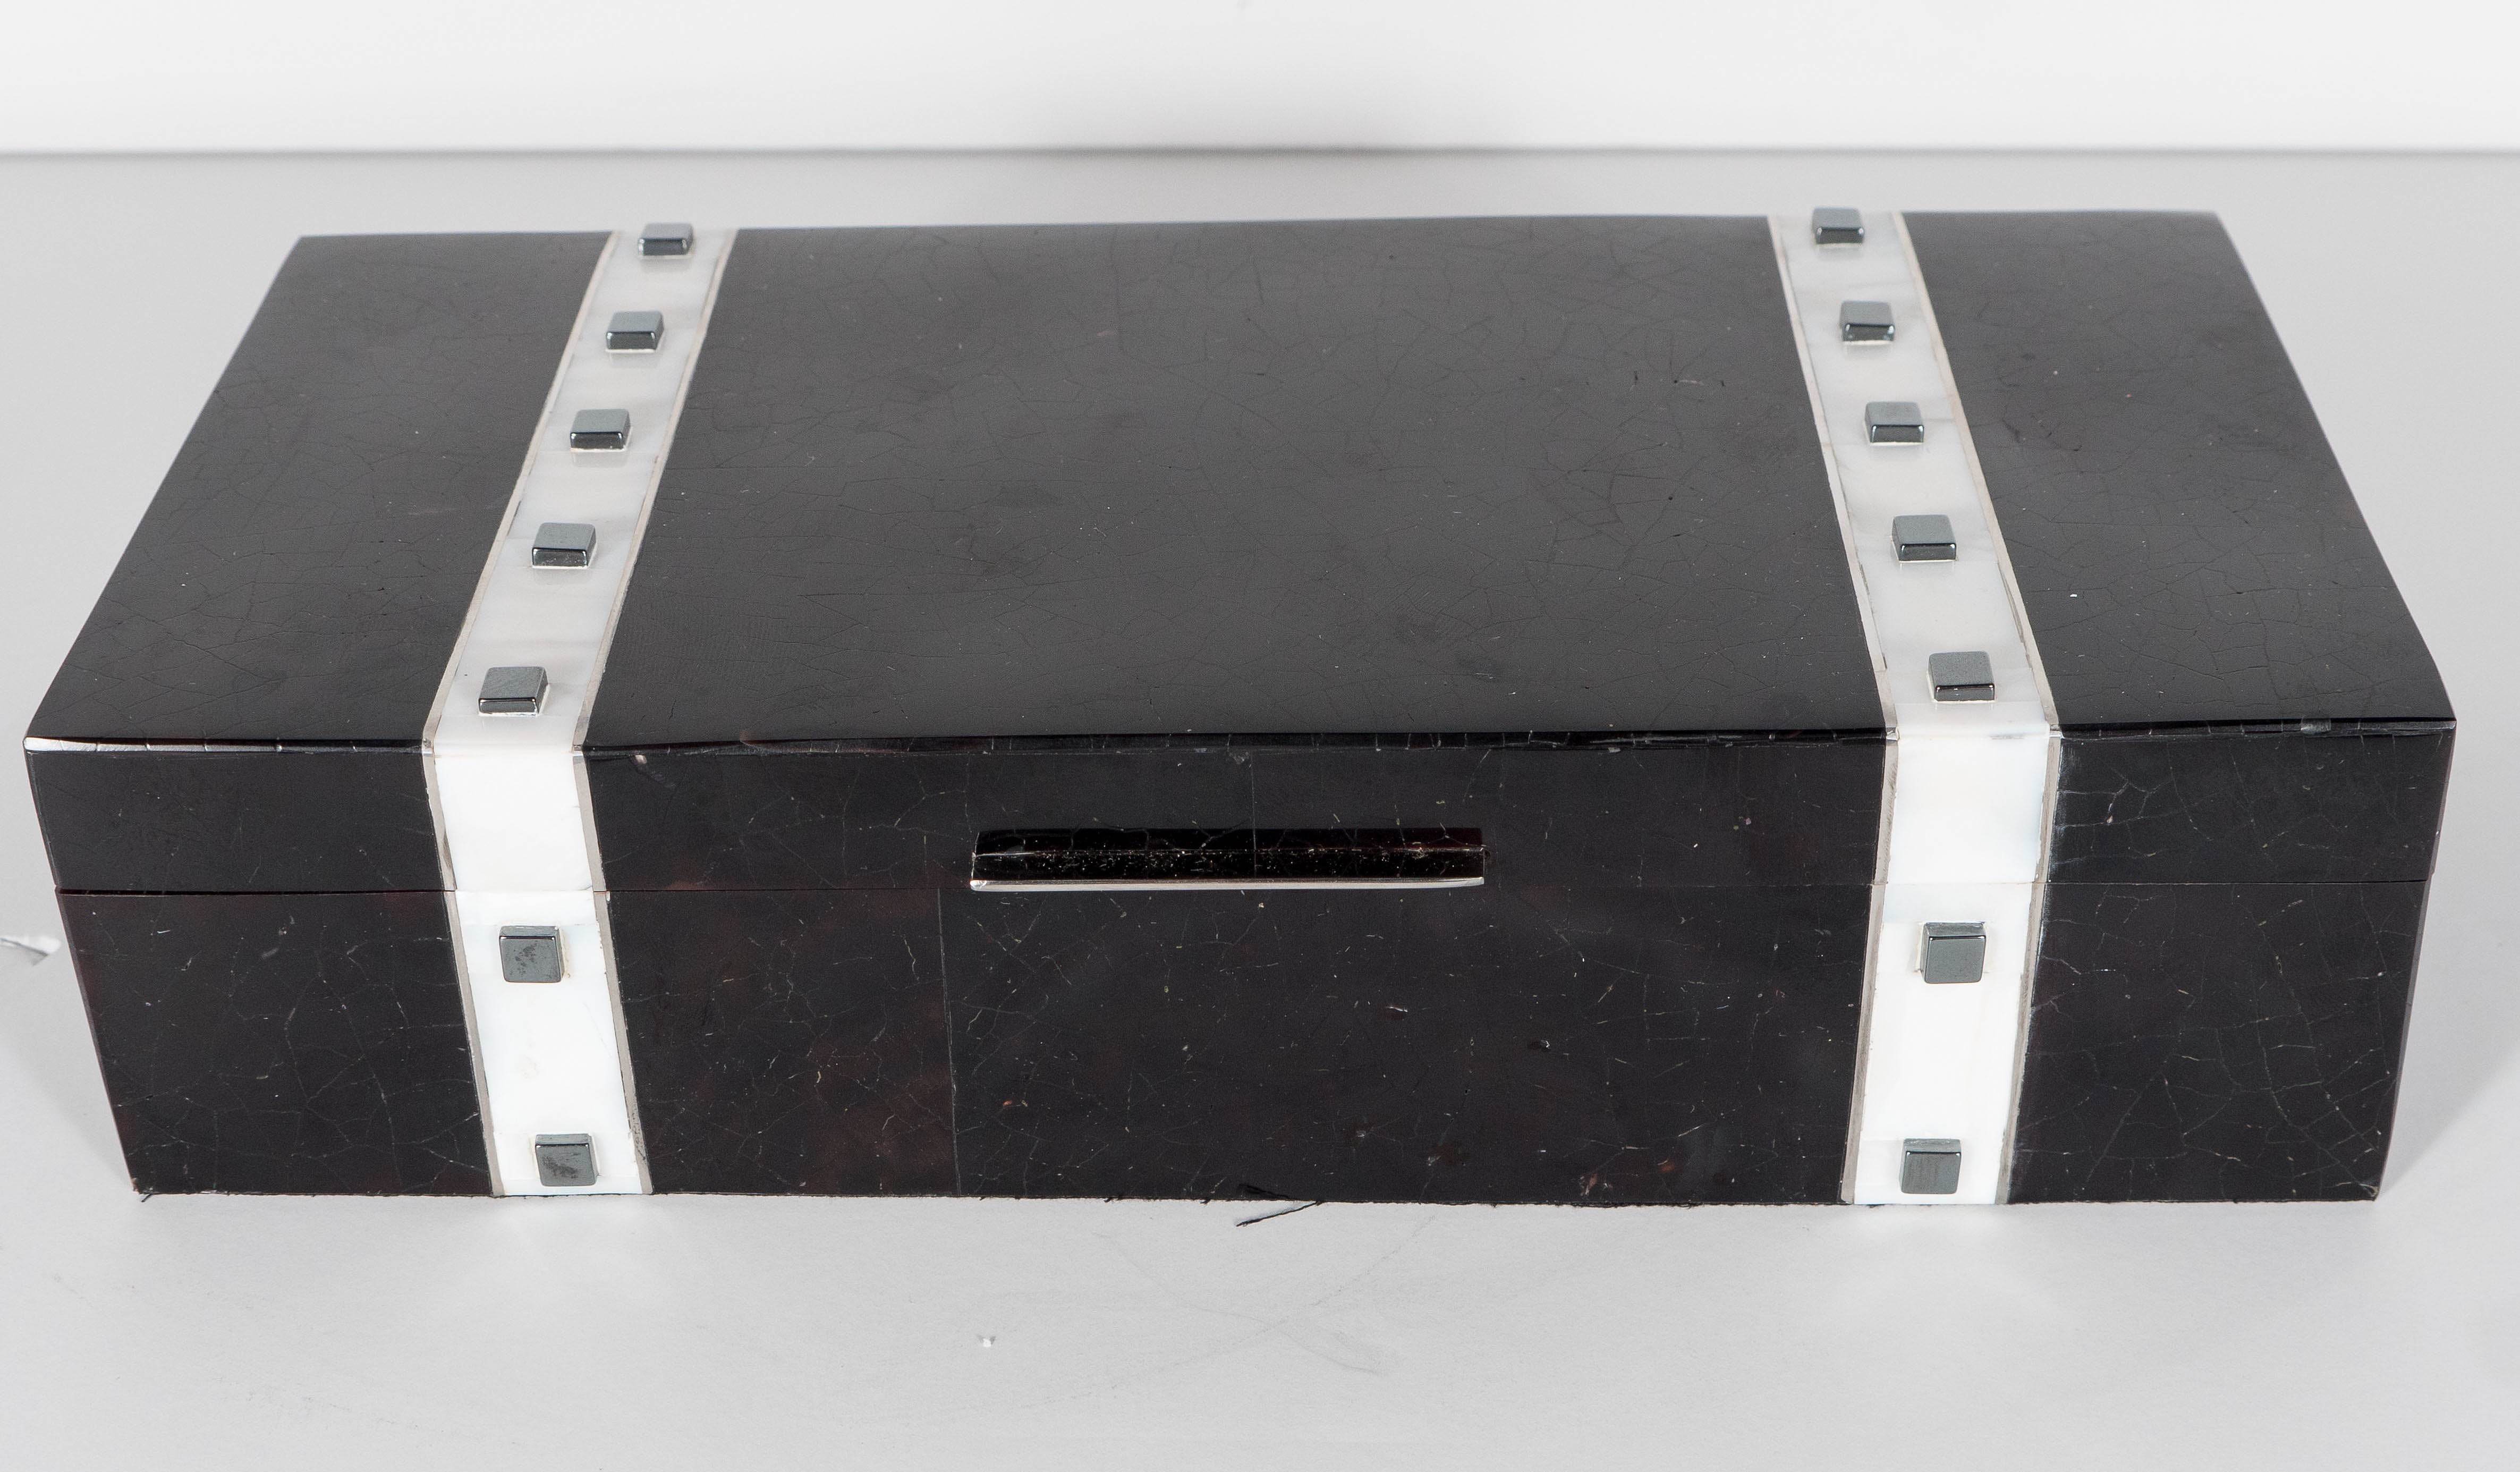 Black Lacquer Cracqueleur Box with Kabibi Inlay and Art Deco Square Motif